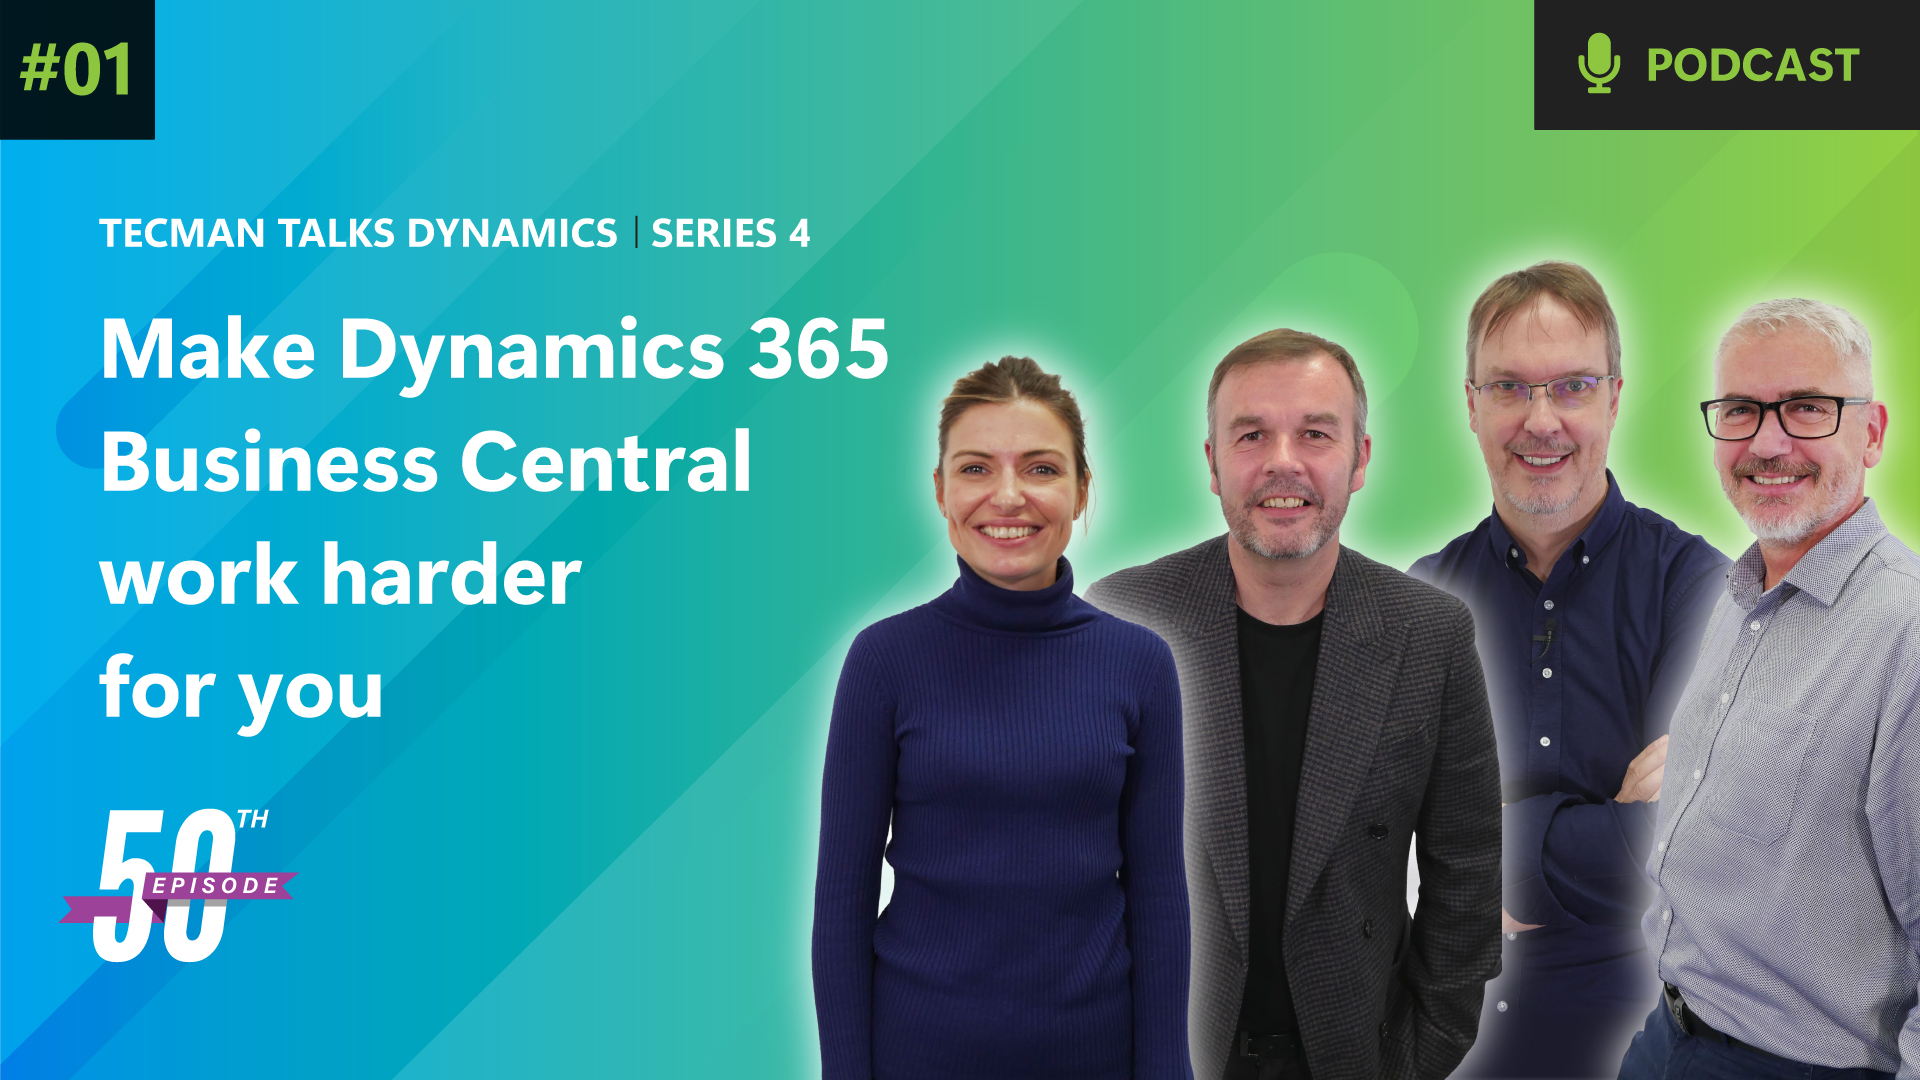 Ep 1: Make Dynamics 365 Business Central work harder for you with the 3 Rs - review, refresh, and revisit!